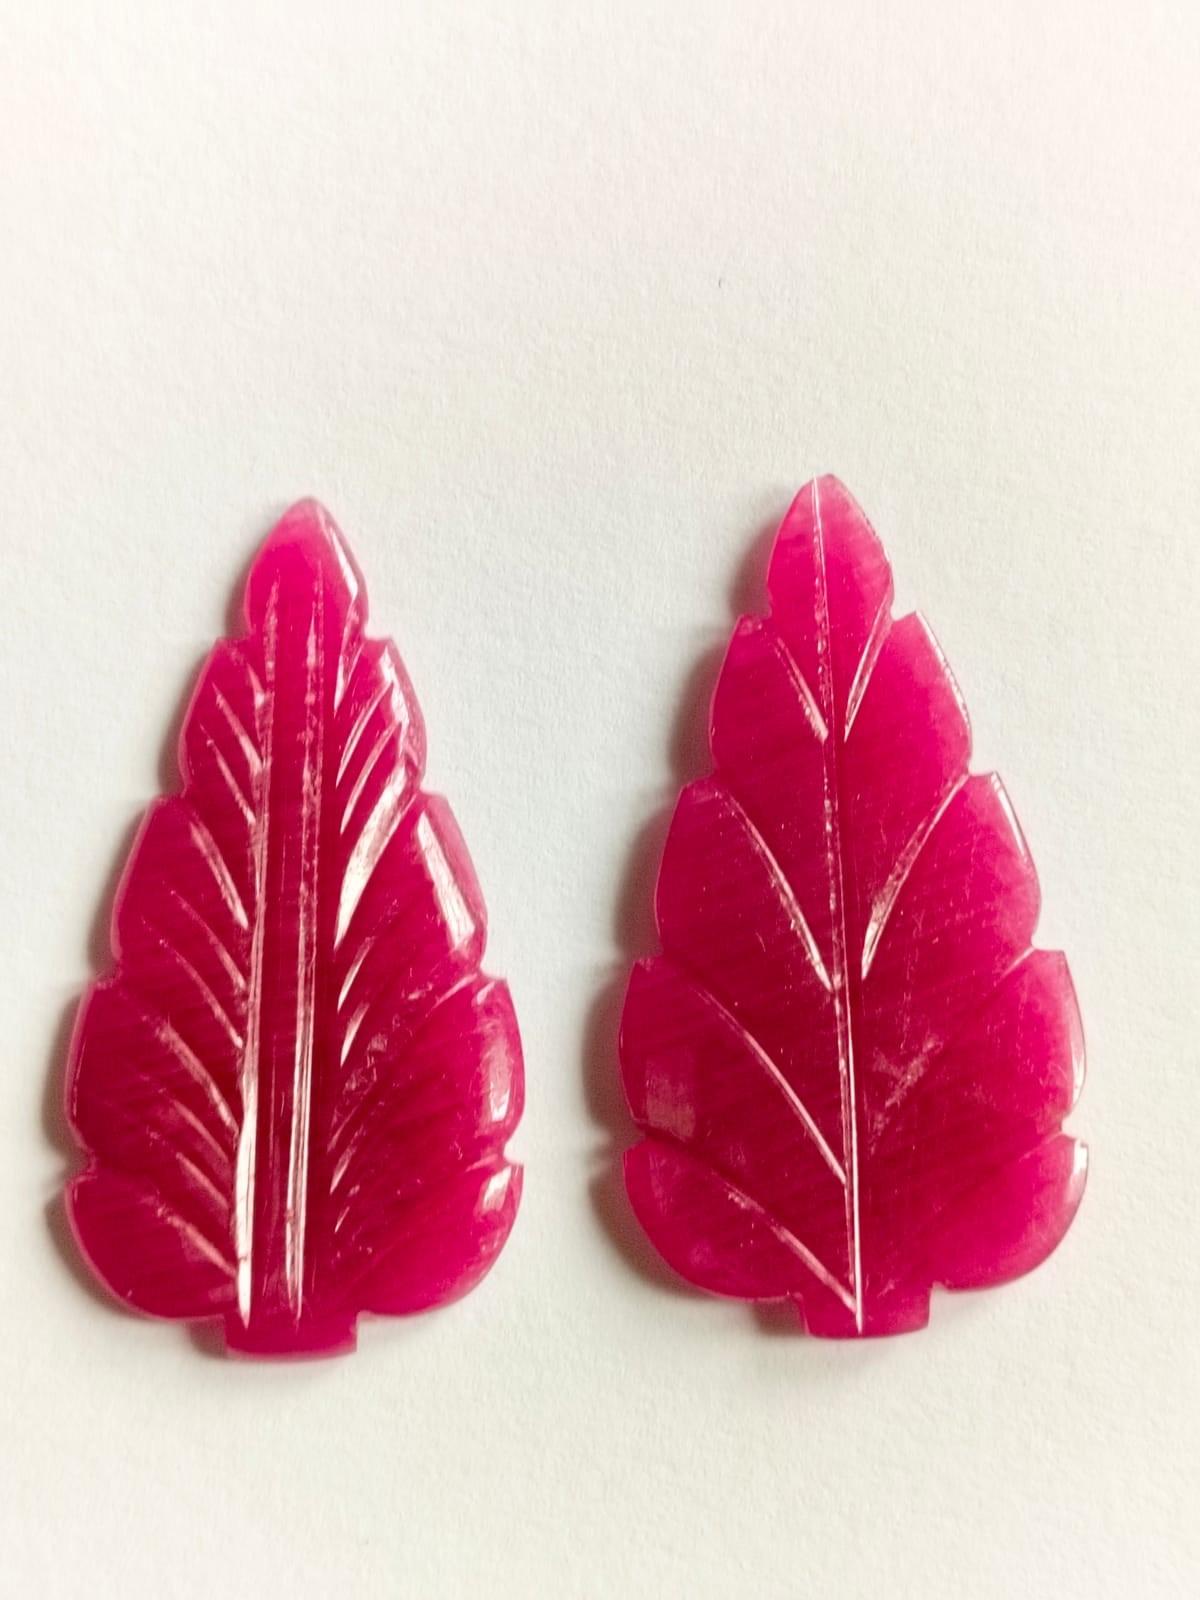 Natural Ruby Carving Leaf Pair Gemstone.
32.10 Carat with a elegant Red color and excellent clarity. Also has an excellent fancy Carving Leaf with ideal polish to show great shine and color . It will look authentic in jewelry. The dimensions of the